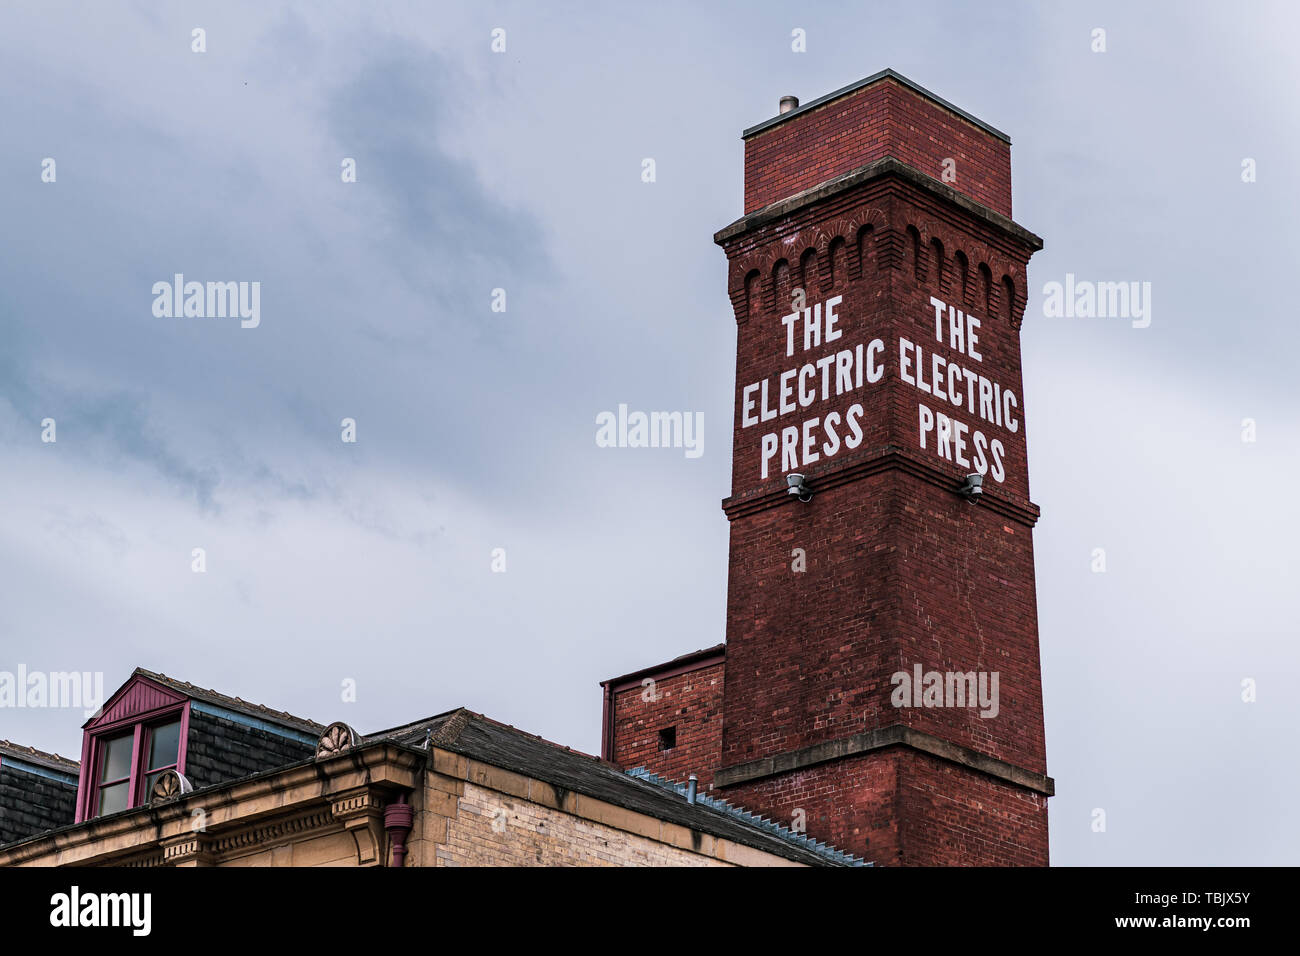 LEEDS, UK - 1ST JUNE 2019: The Electric Press famous chimney and sign on display in the city Stock Photo